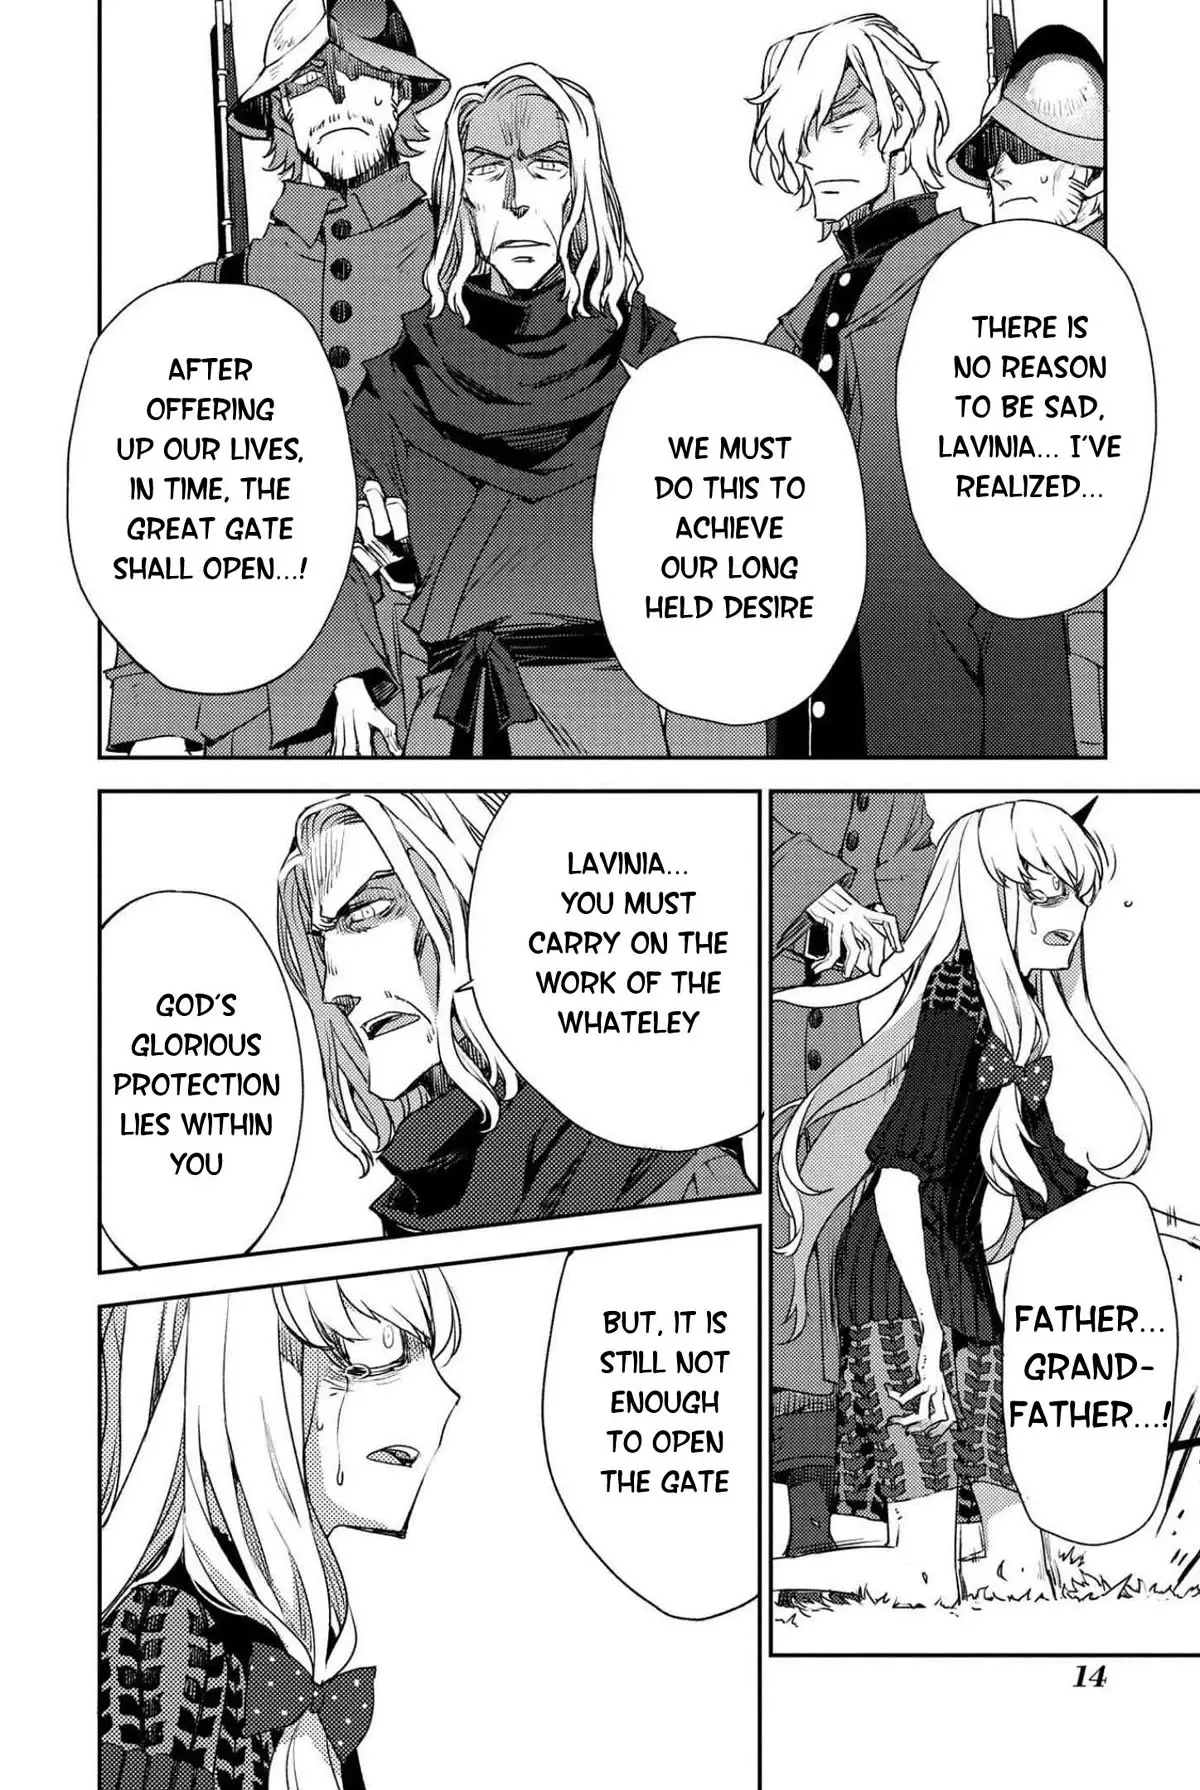 Fate/grand Order: Epic Of Remnant - Subspecies Singularity Iv: Taboo Advent Salem: Salem Of Heresy - 23 page 14-5d3b0586